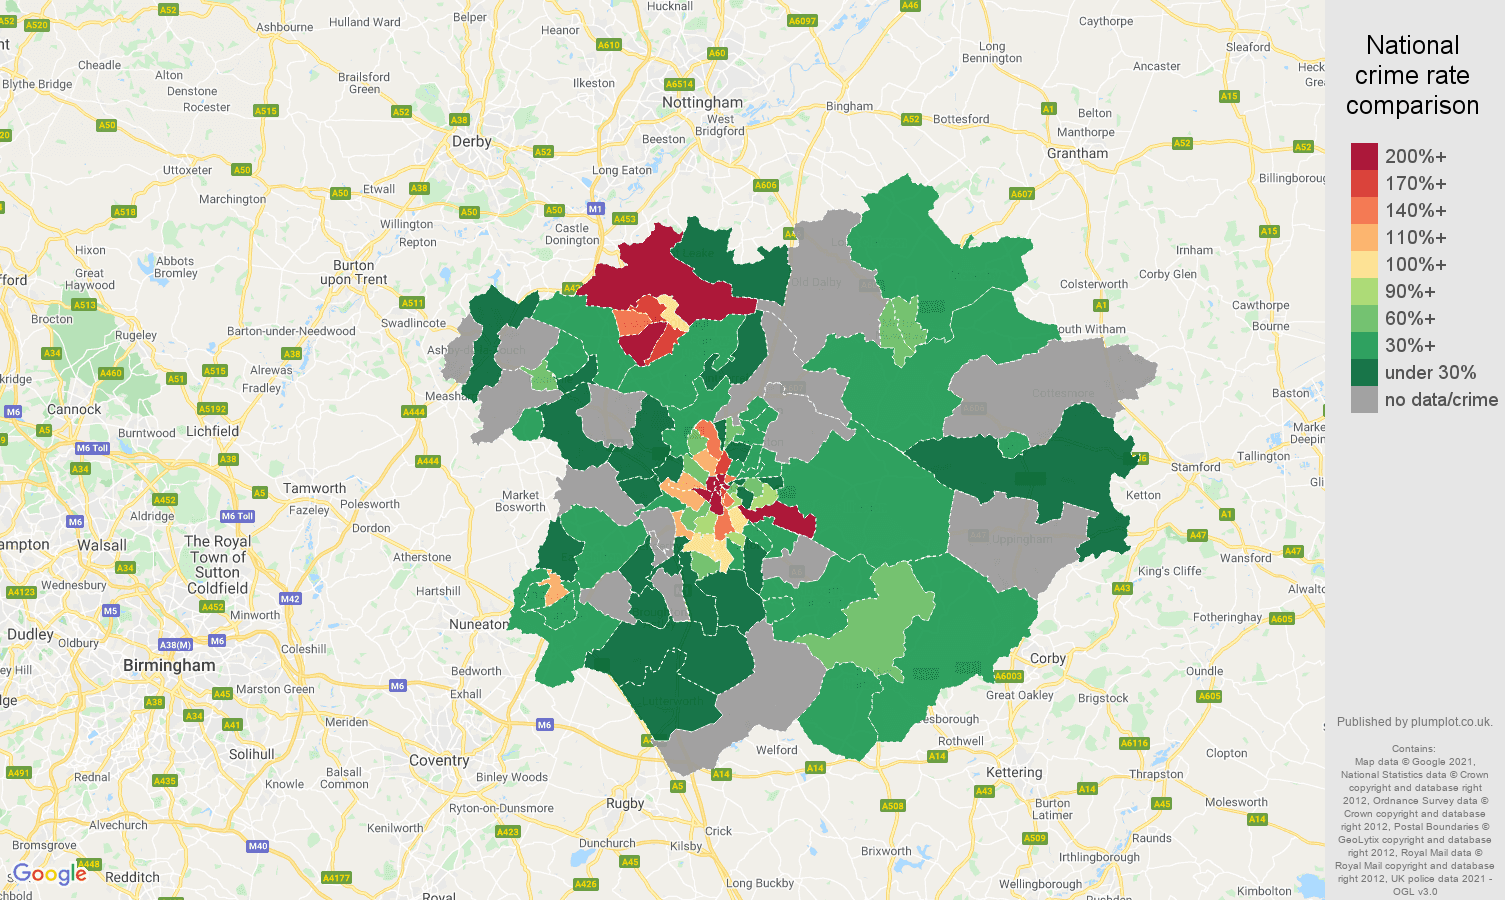 Leicester bicycle theft crime rate comparison map